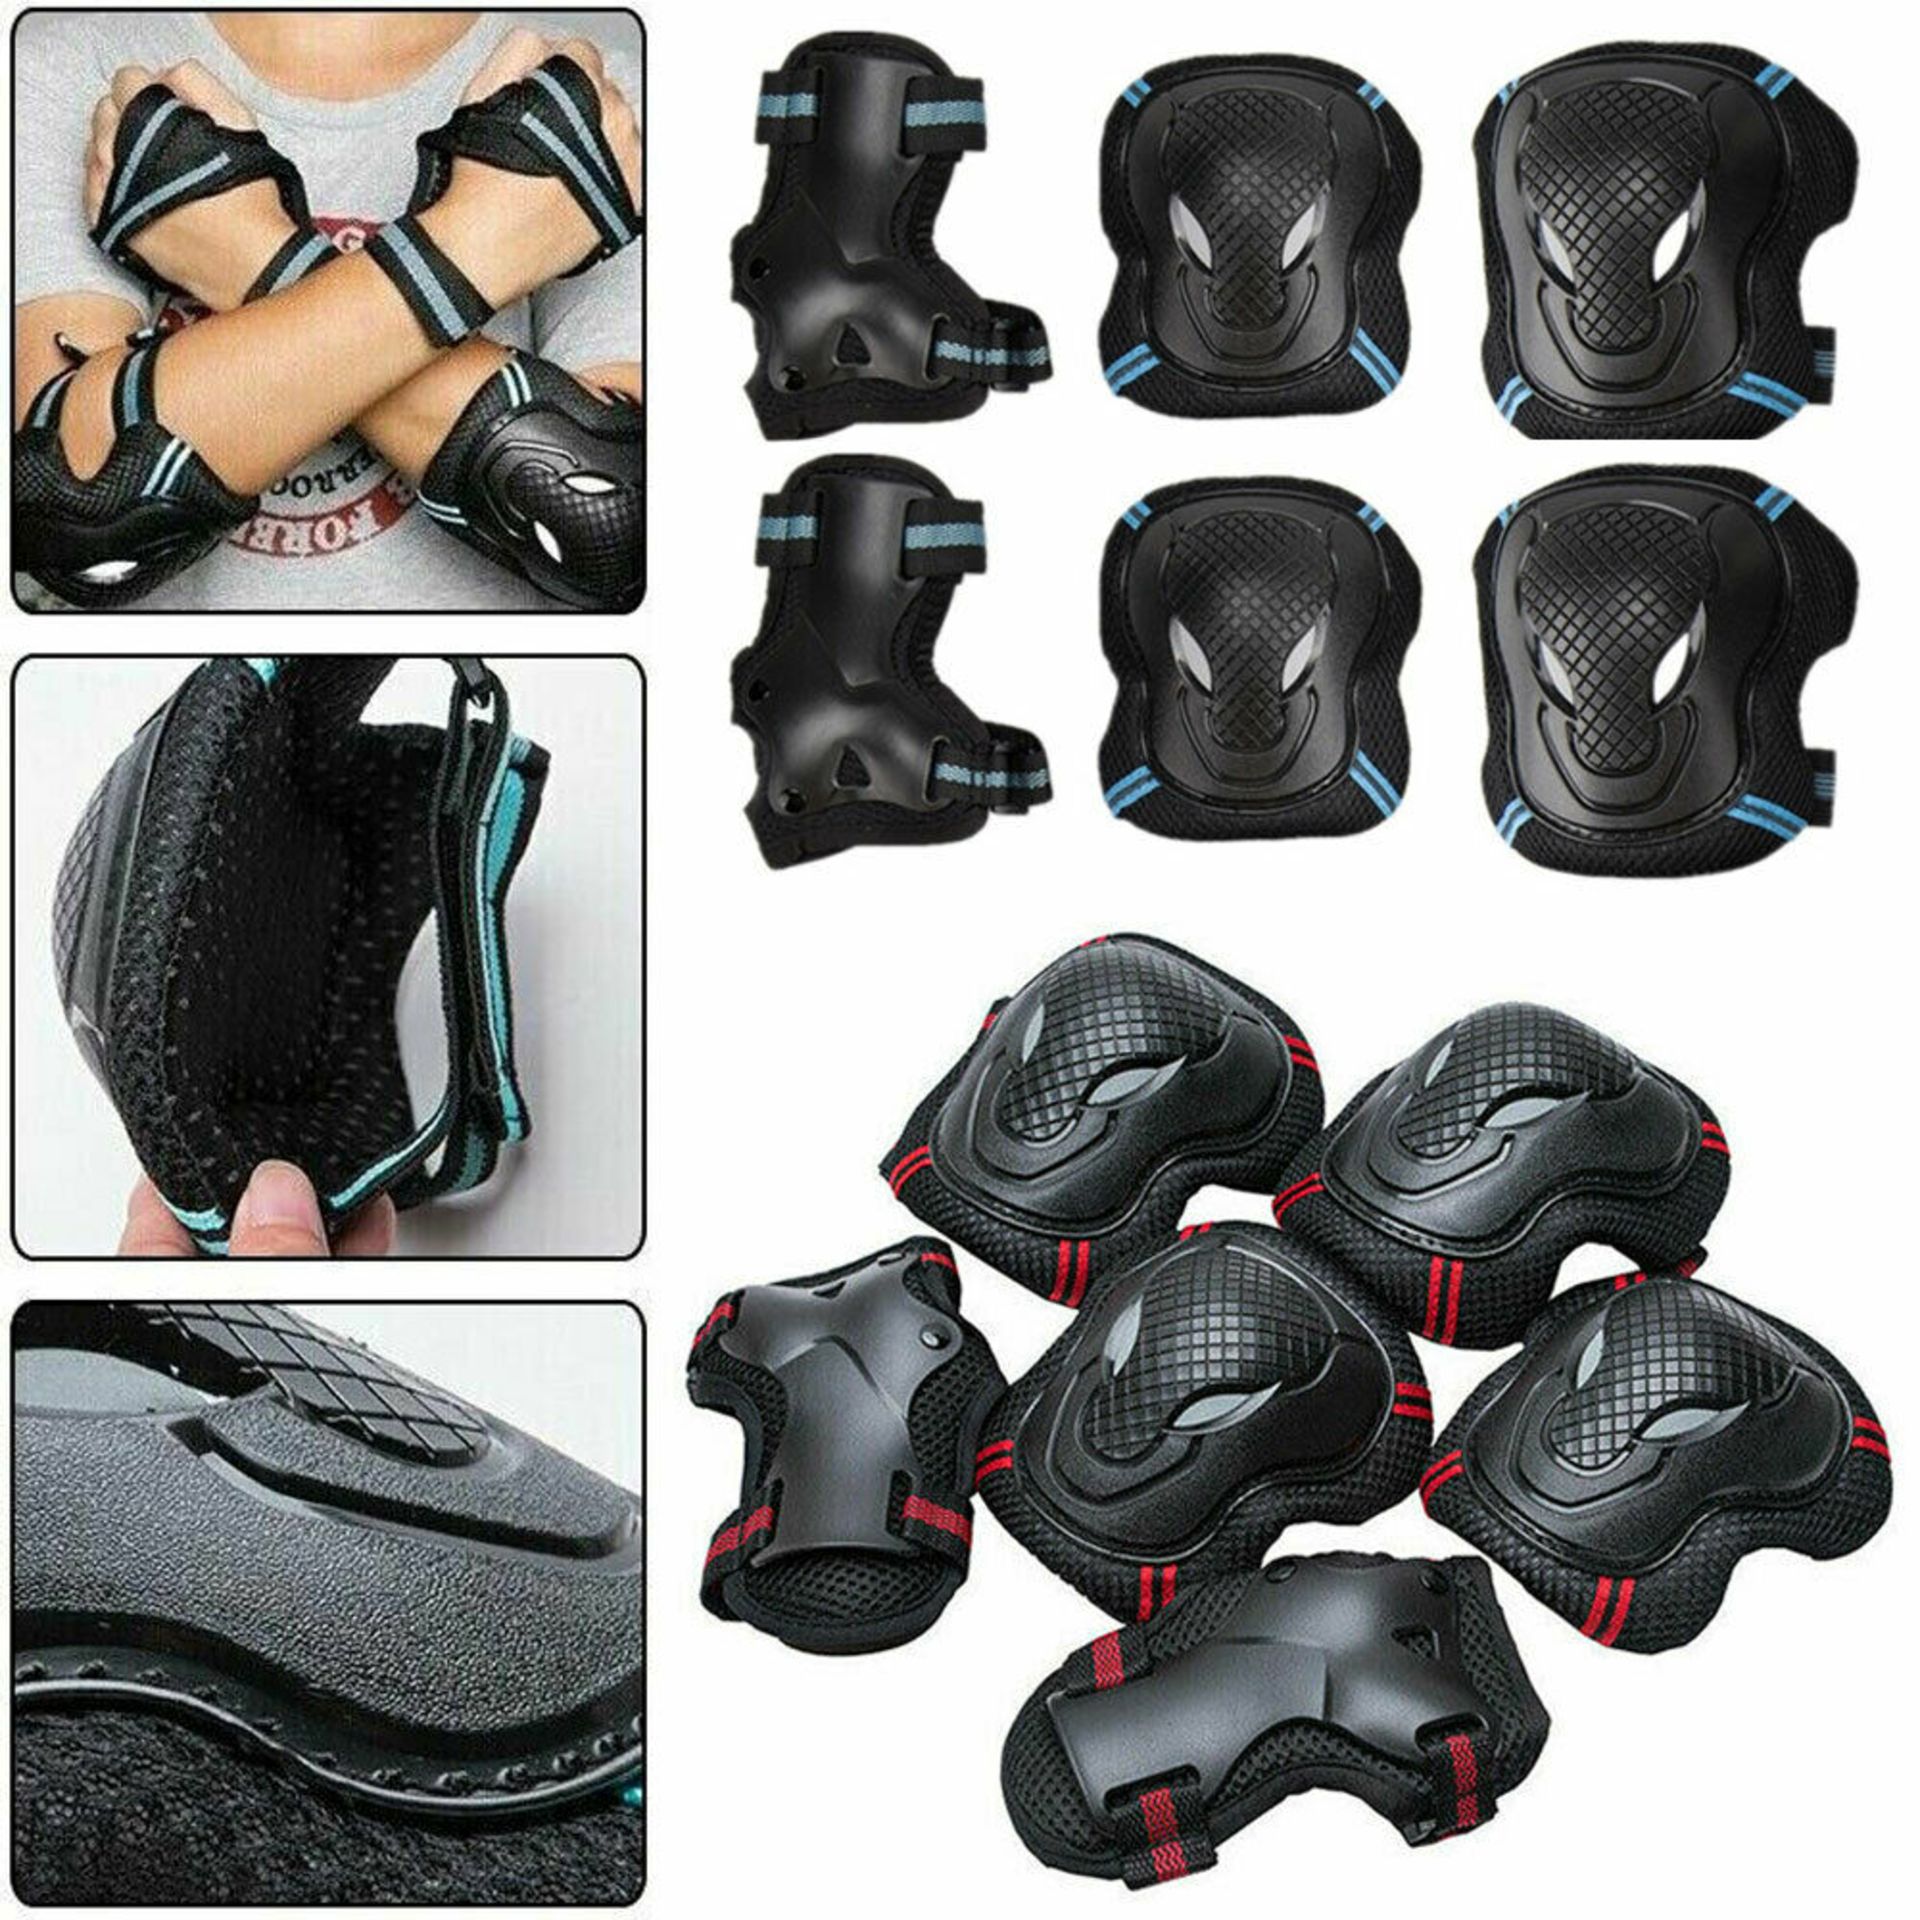 50 x Sets of Brand New Bauer Safety Pads | Assorted Adult and Kids Sizes/Types - Image 2 of 4